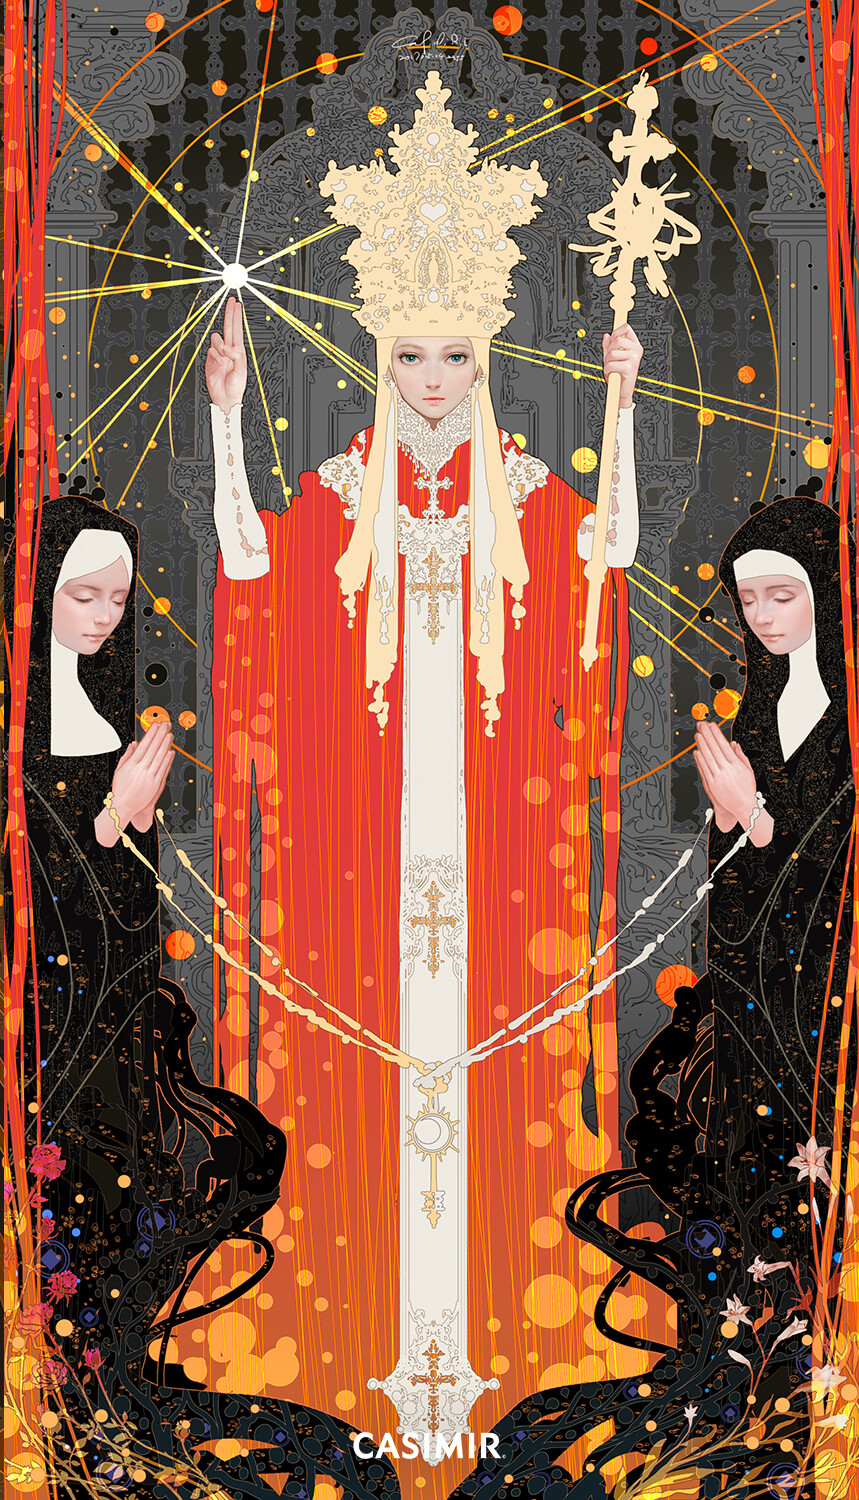 5.The Hierophant / 教皇

Details
--------------------------------------
Limited Edition of 30
Size : 40(W) x 70(H) cm
Numbered and signed COA
12 colors high quality print on watercolor paper
--------------------------------------